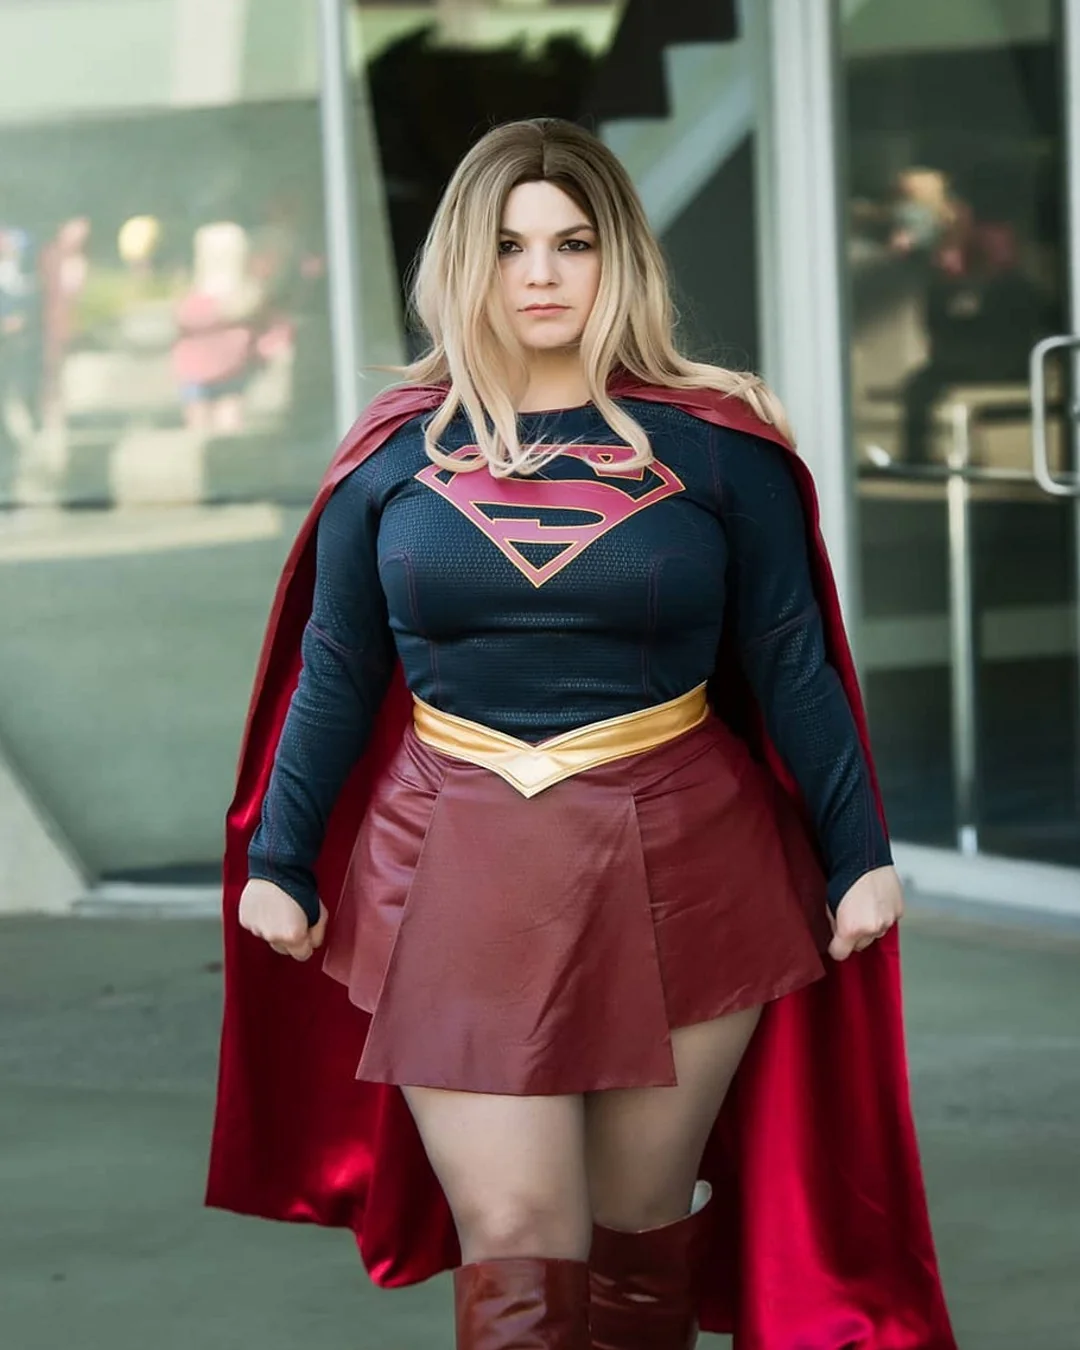 ddtcosplay as supergirl costume